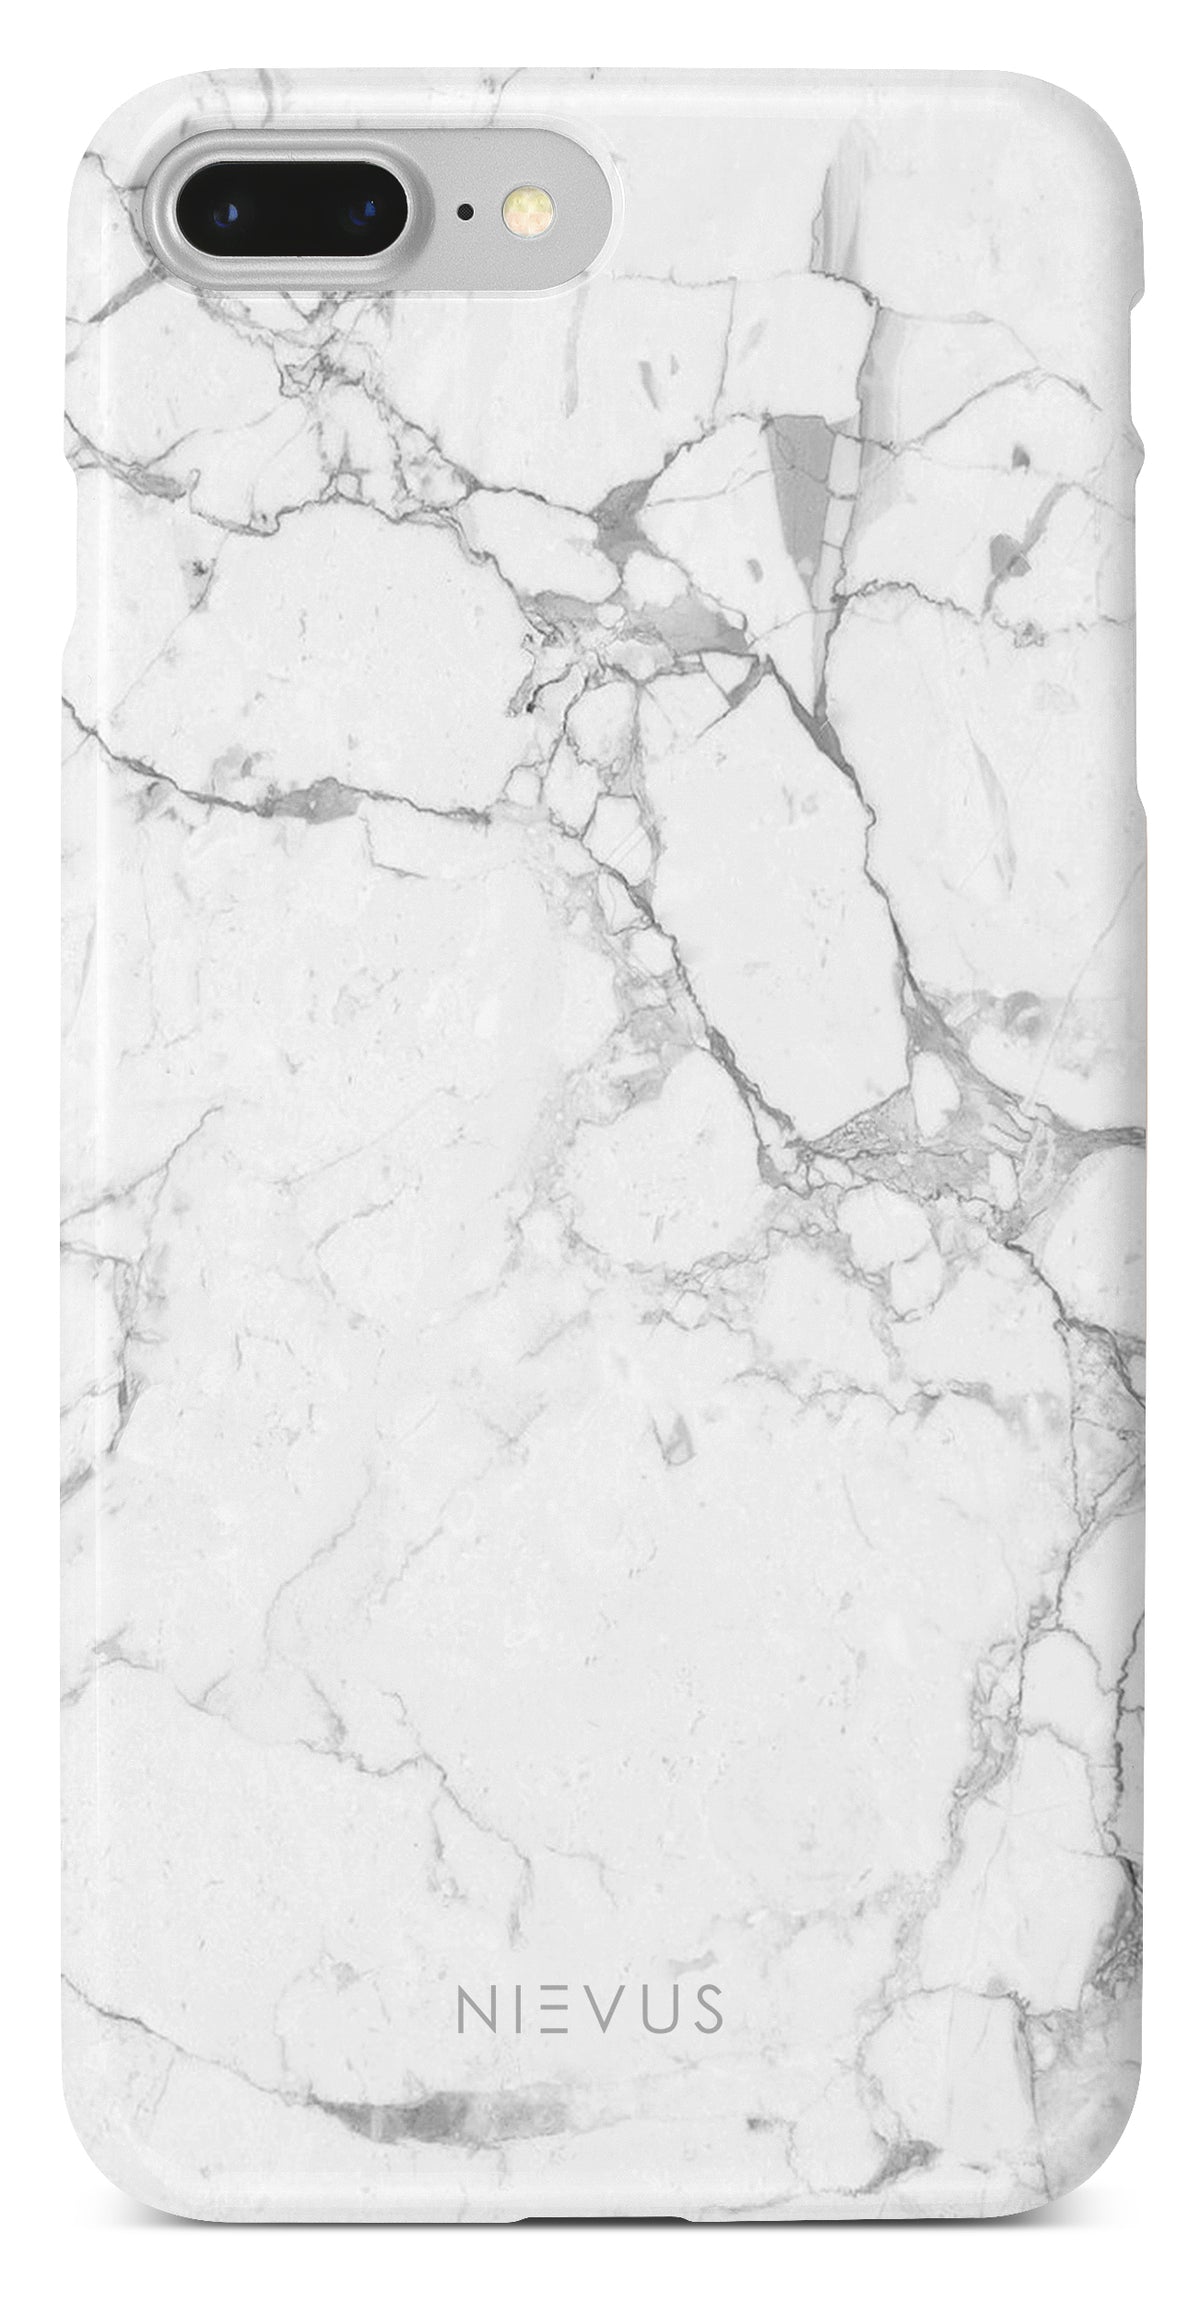 The Cracked White Marble Case